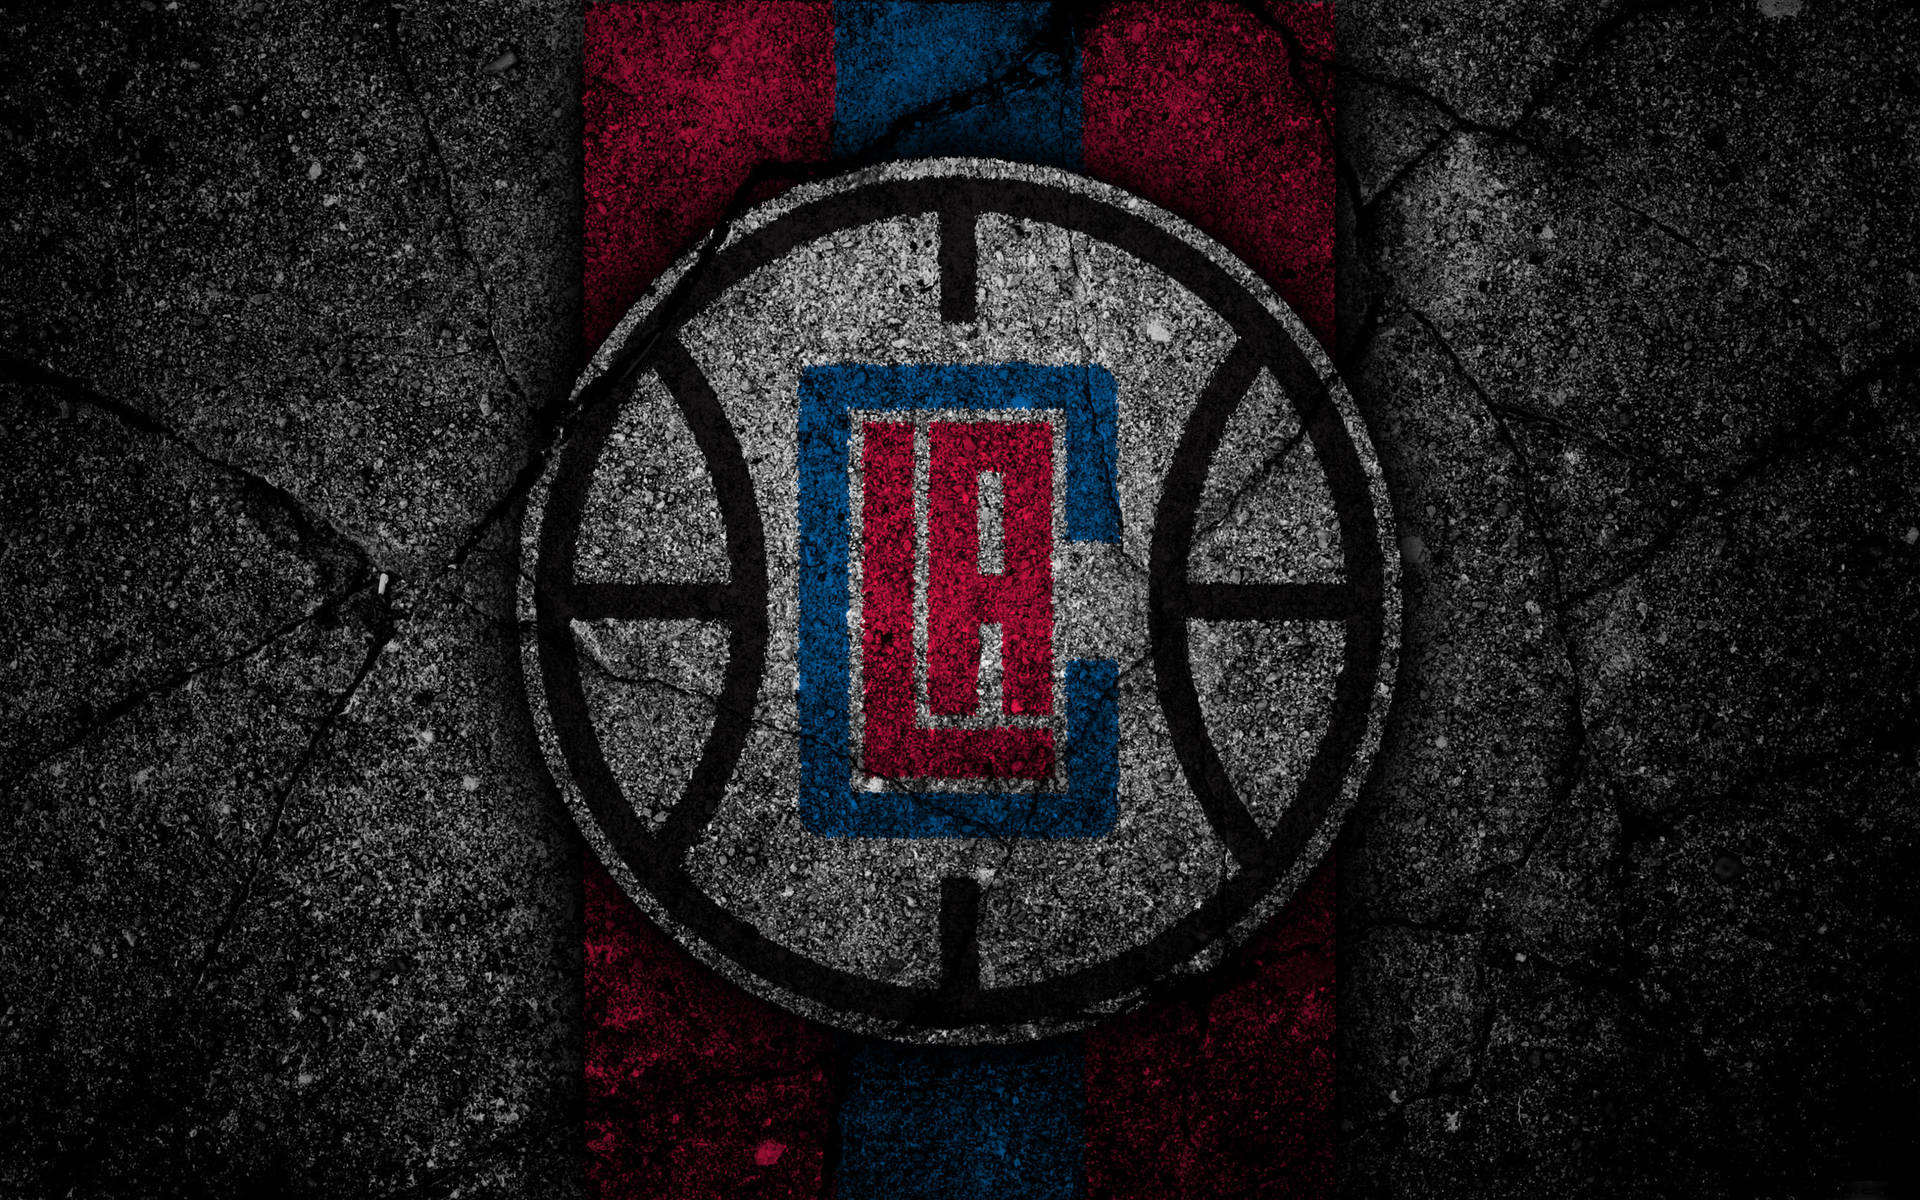 Los Angeles Clippers Stone Design Wallpaper